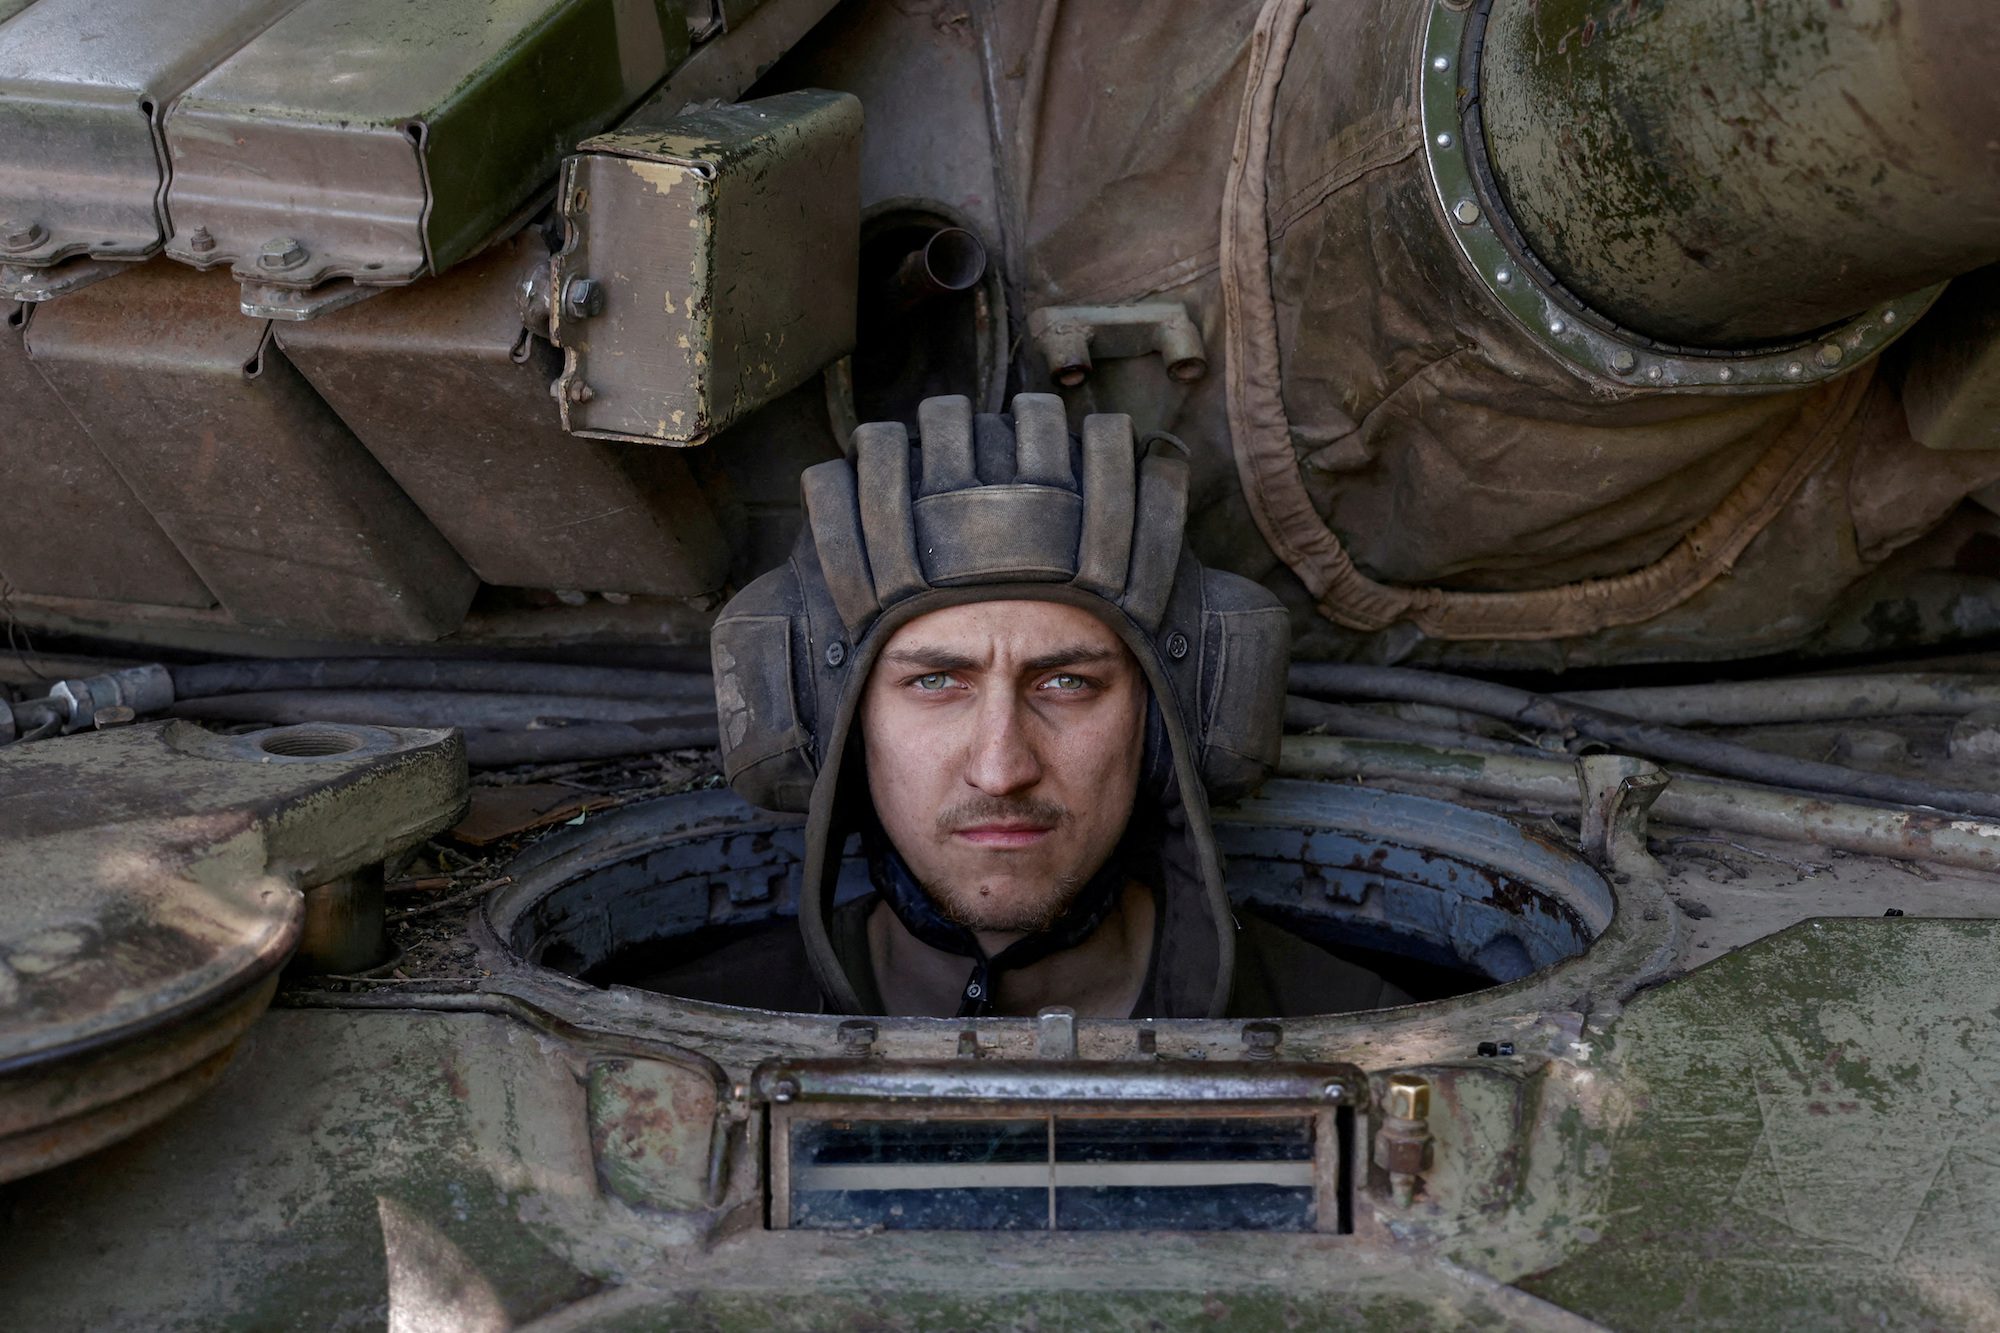 A Ukrainian serviceman looks on from inside a tank at a position in Donetsk region, as Russia's attack on Ukraine continues, June 11, 2022.        REUTERS/Stringer